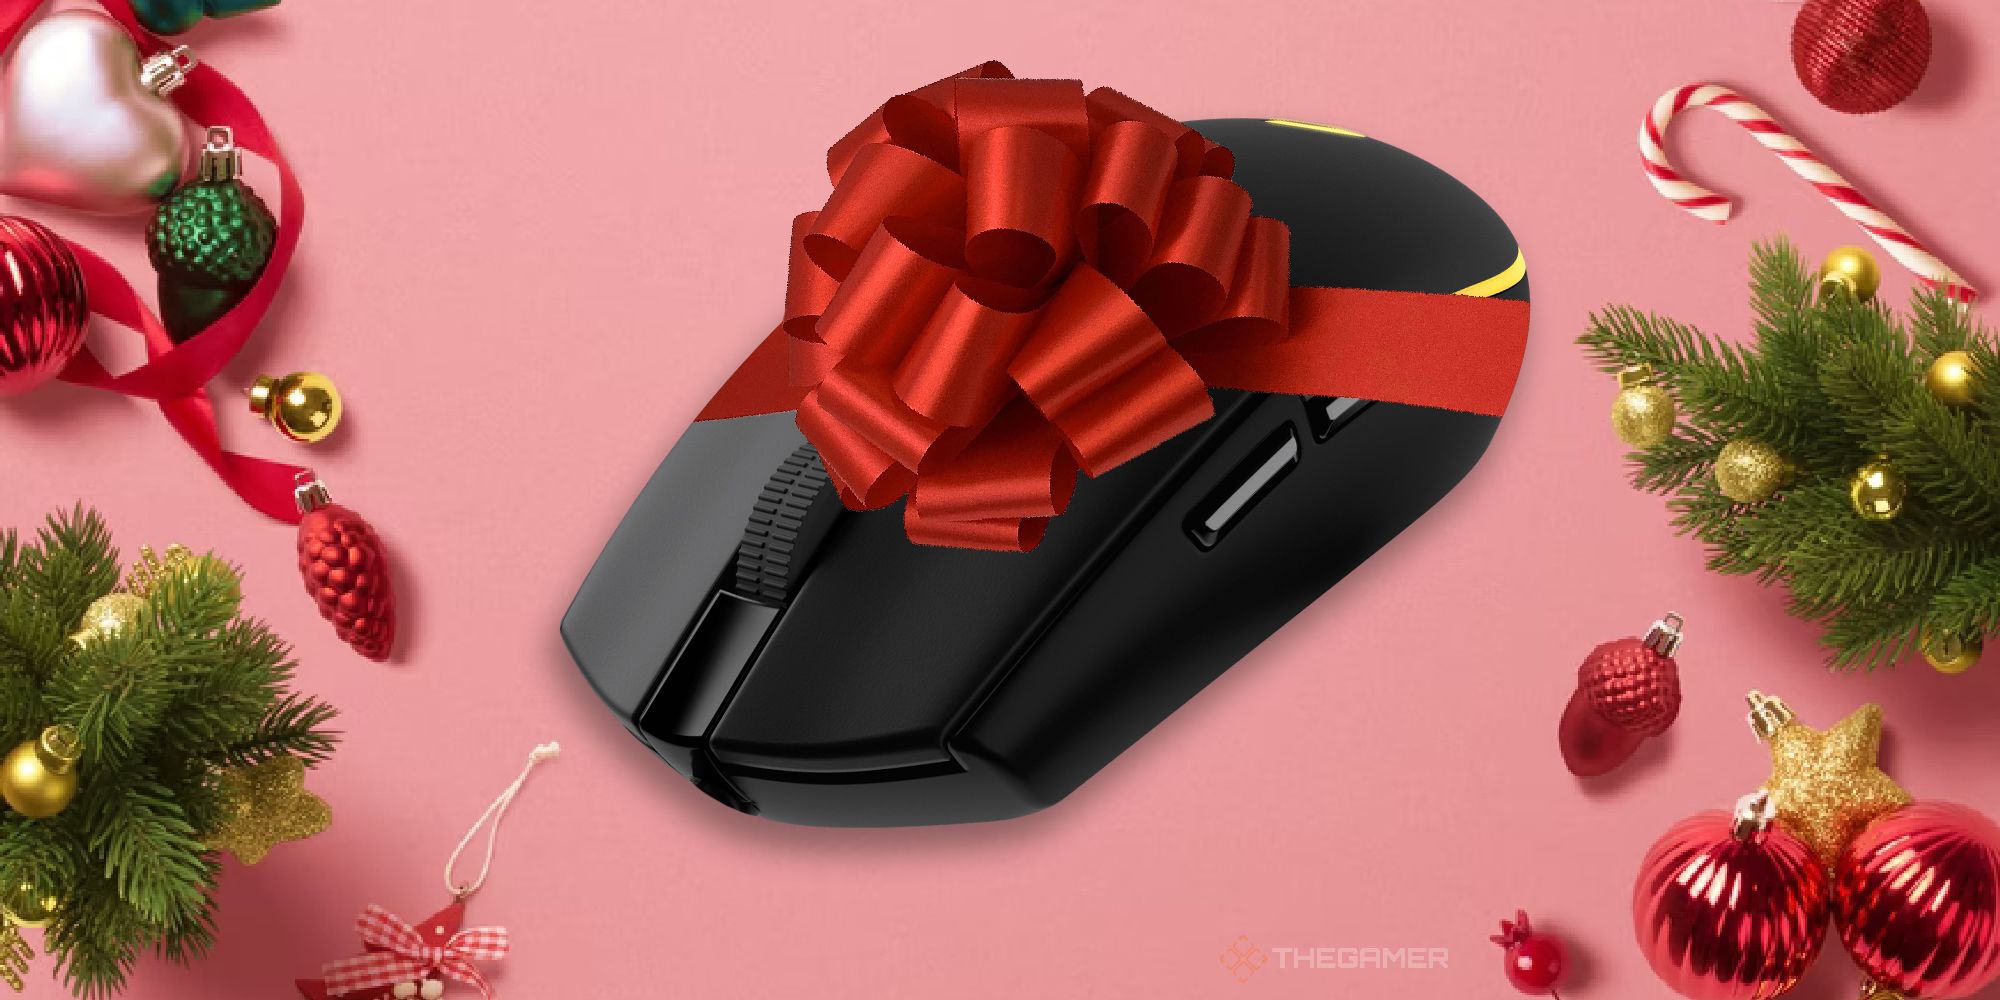 Best Logitech Accessories To Give As Holiday Gifts 2021